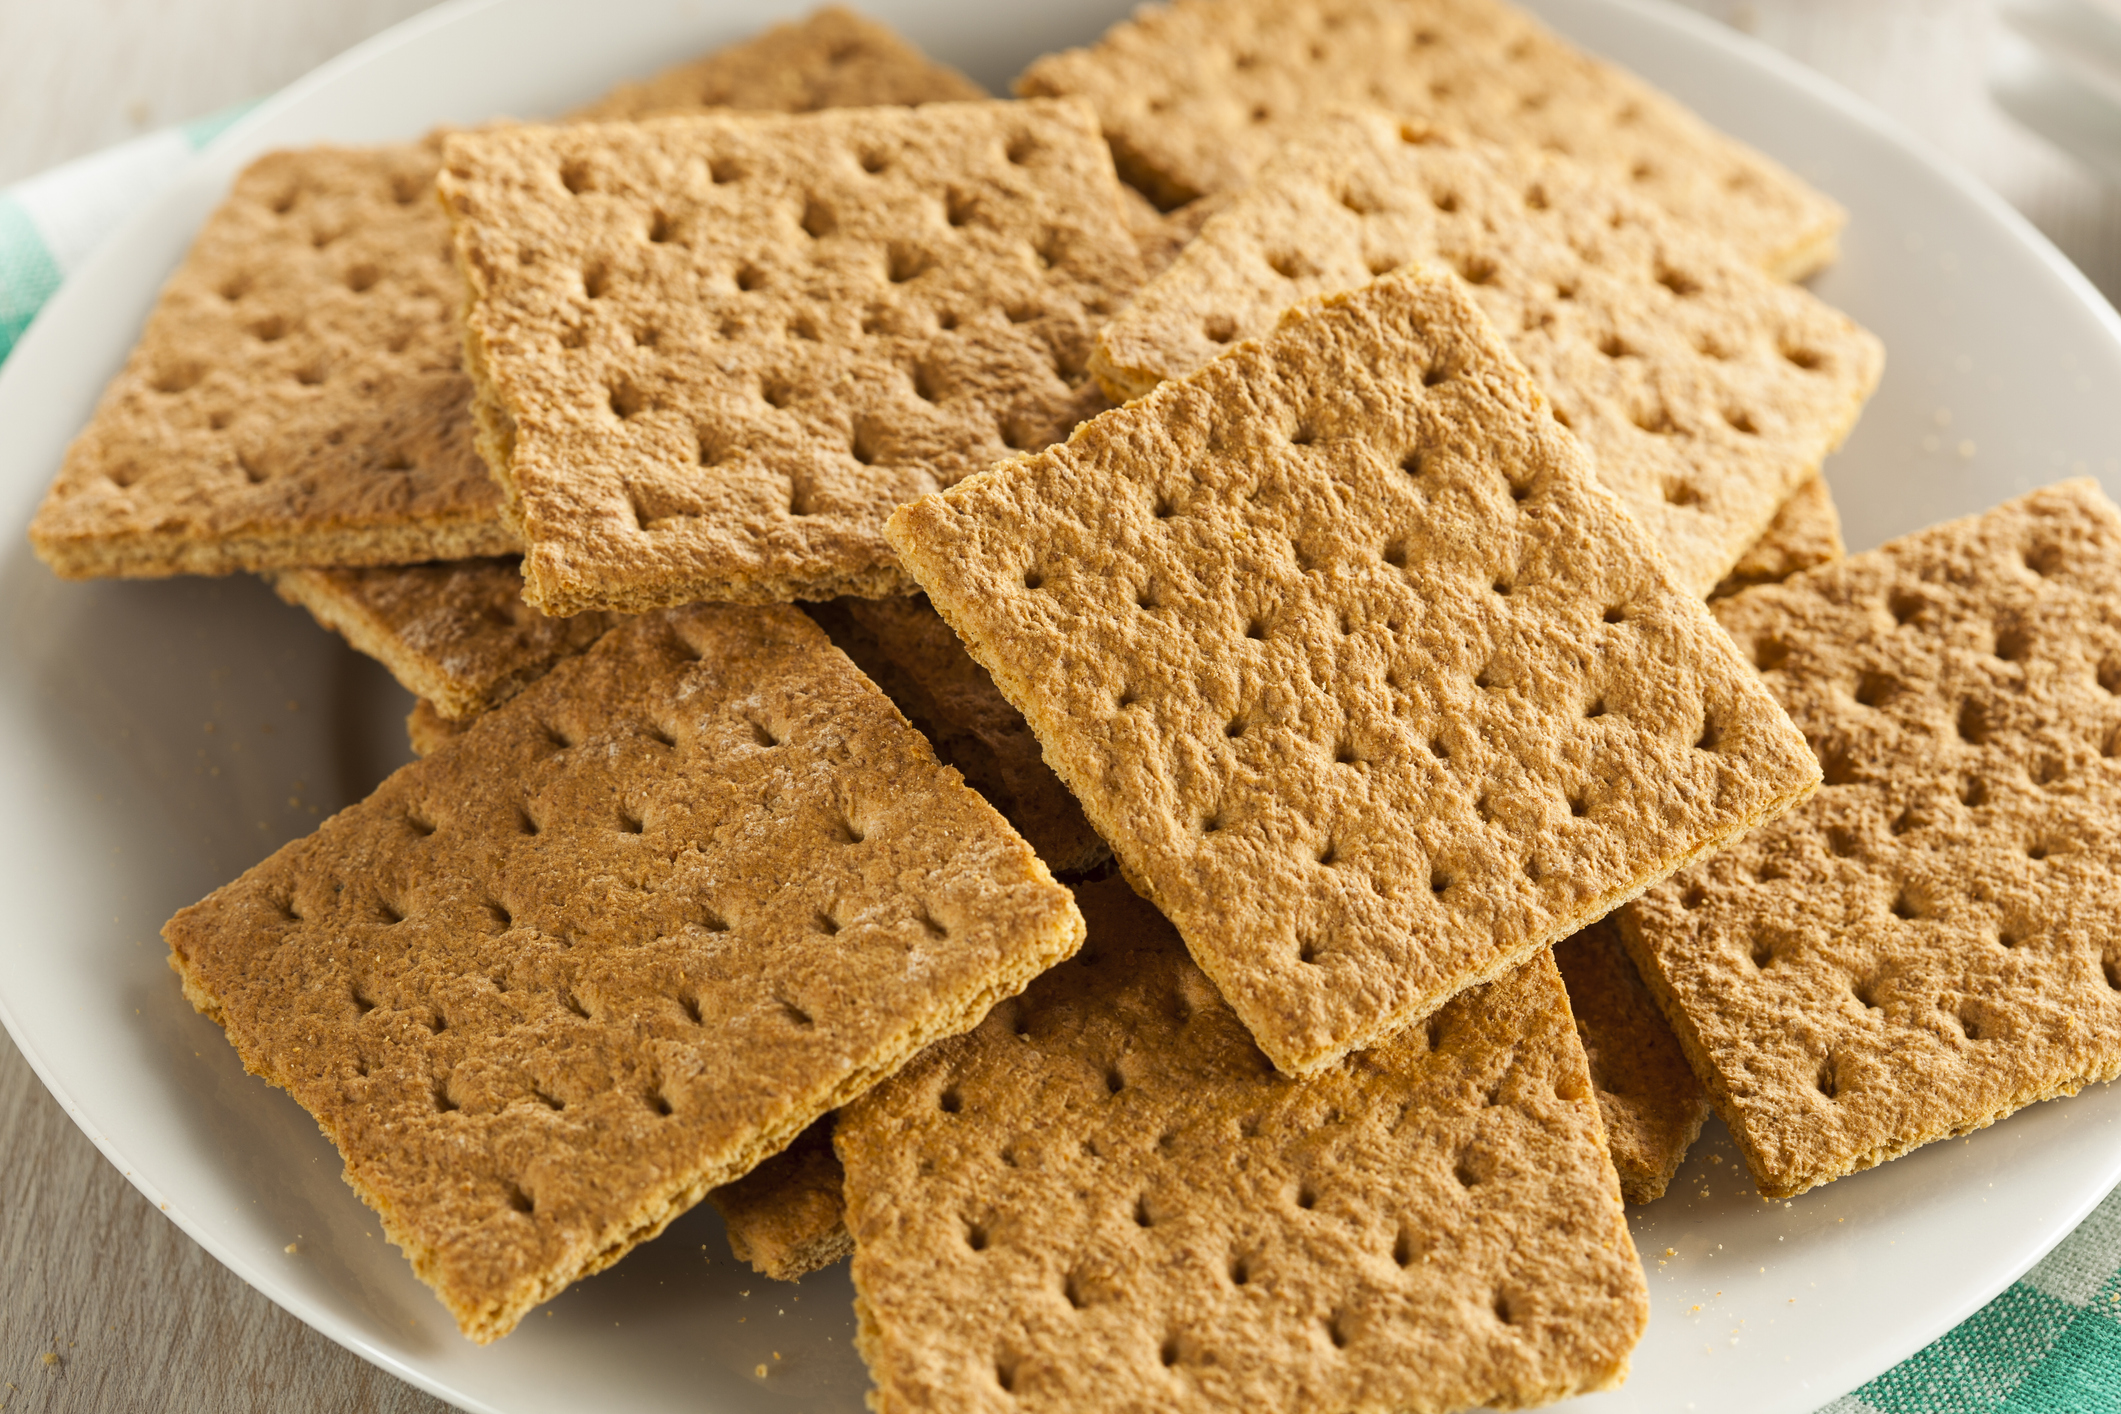 Why were graham crackers invented